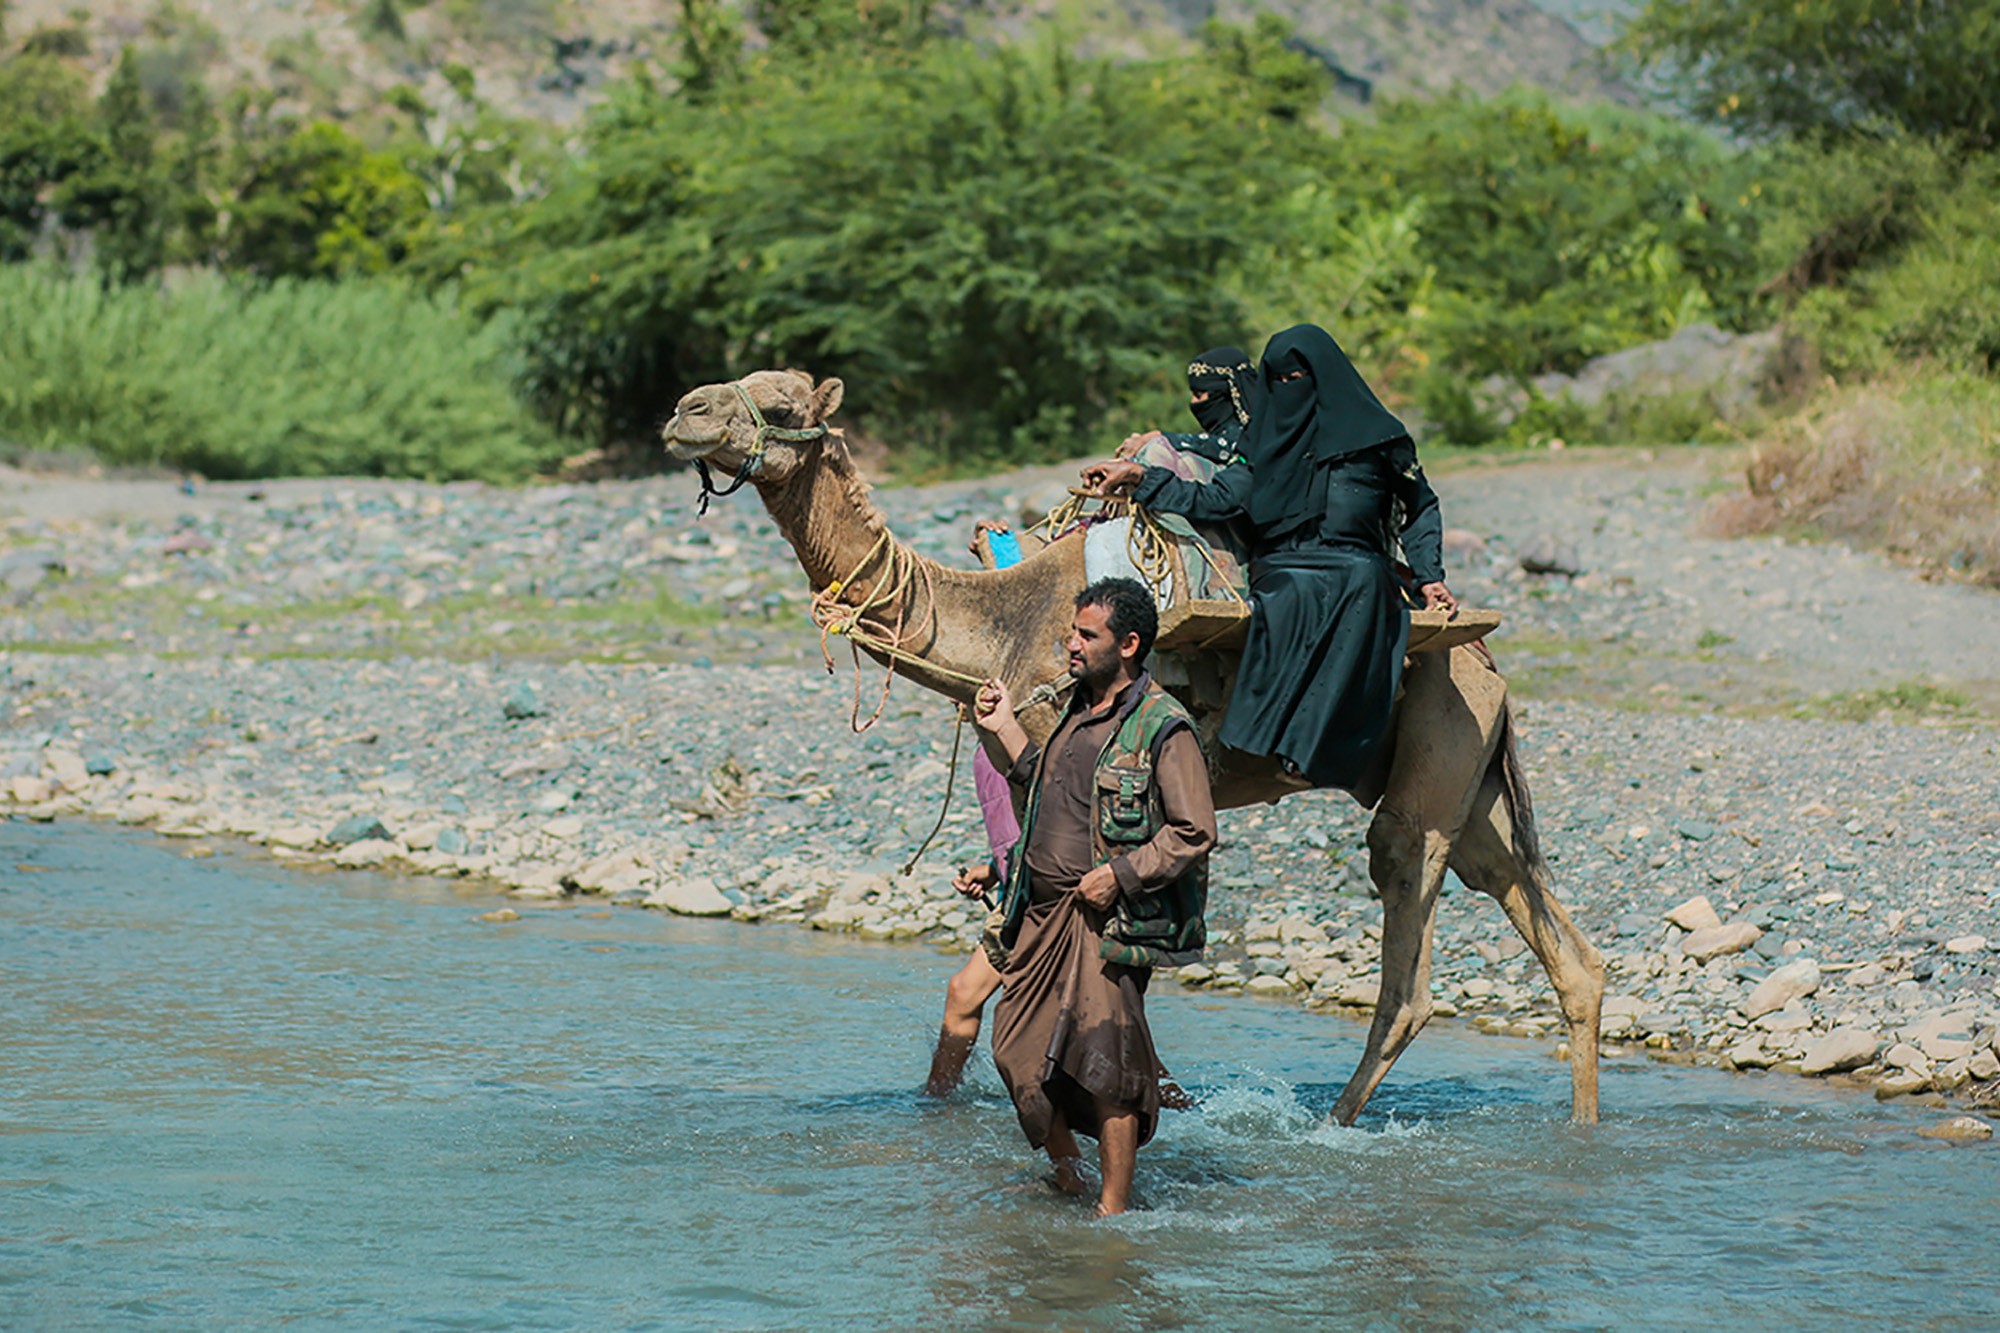 A pregnant woman is crossing a river on a camel that is being pulled by a man.